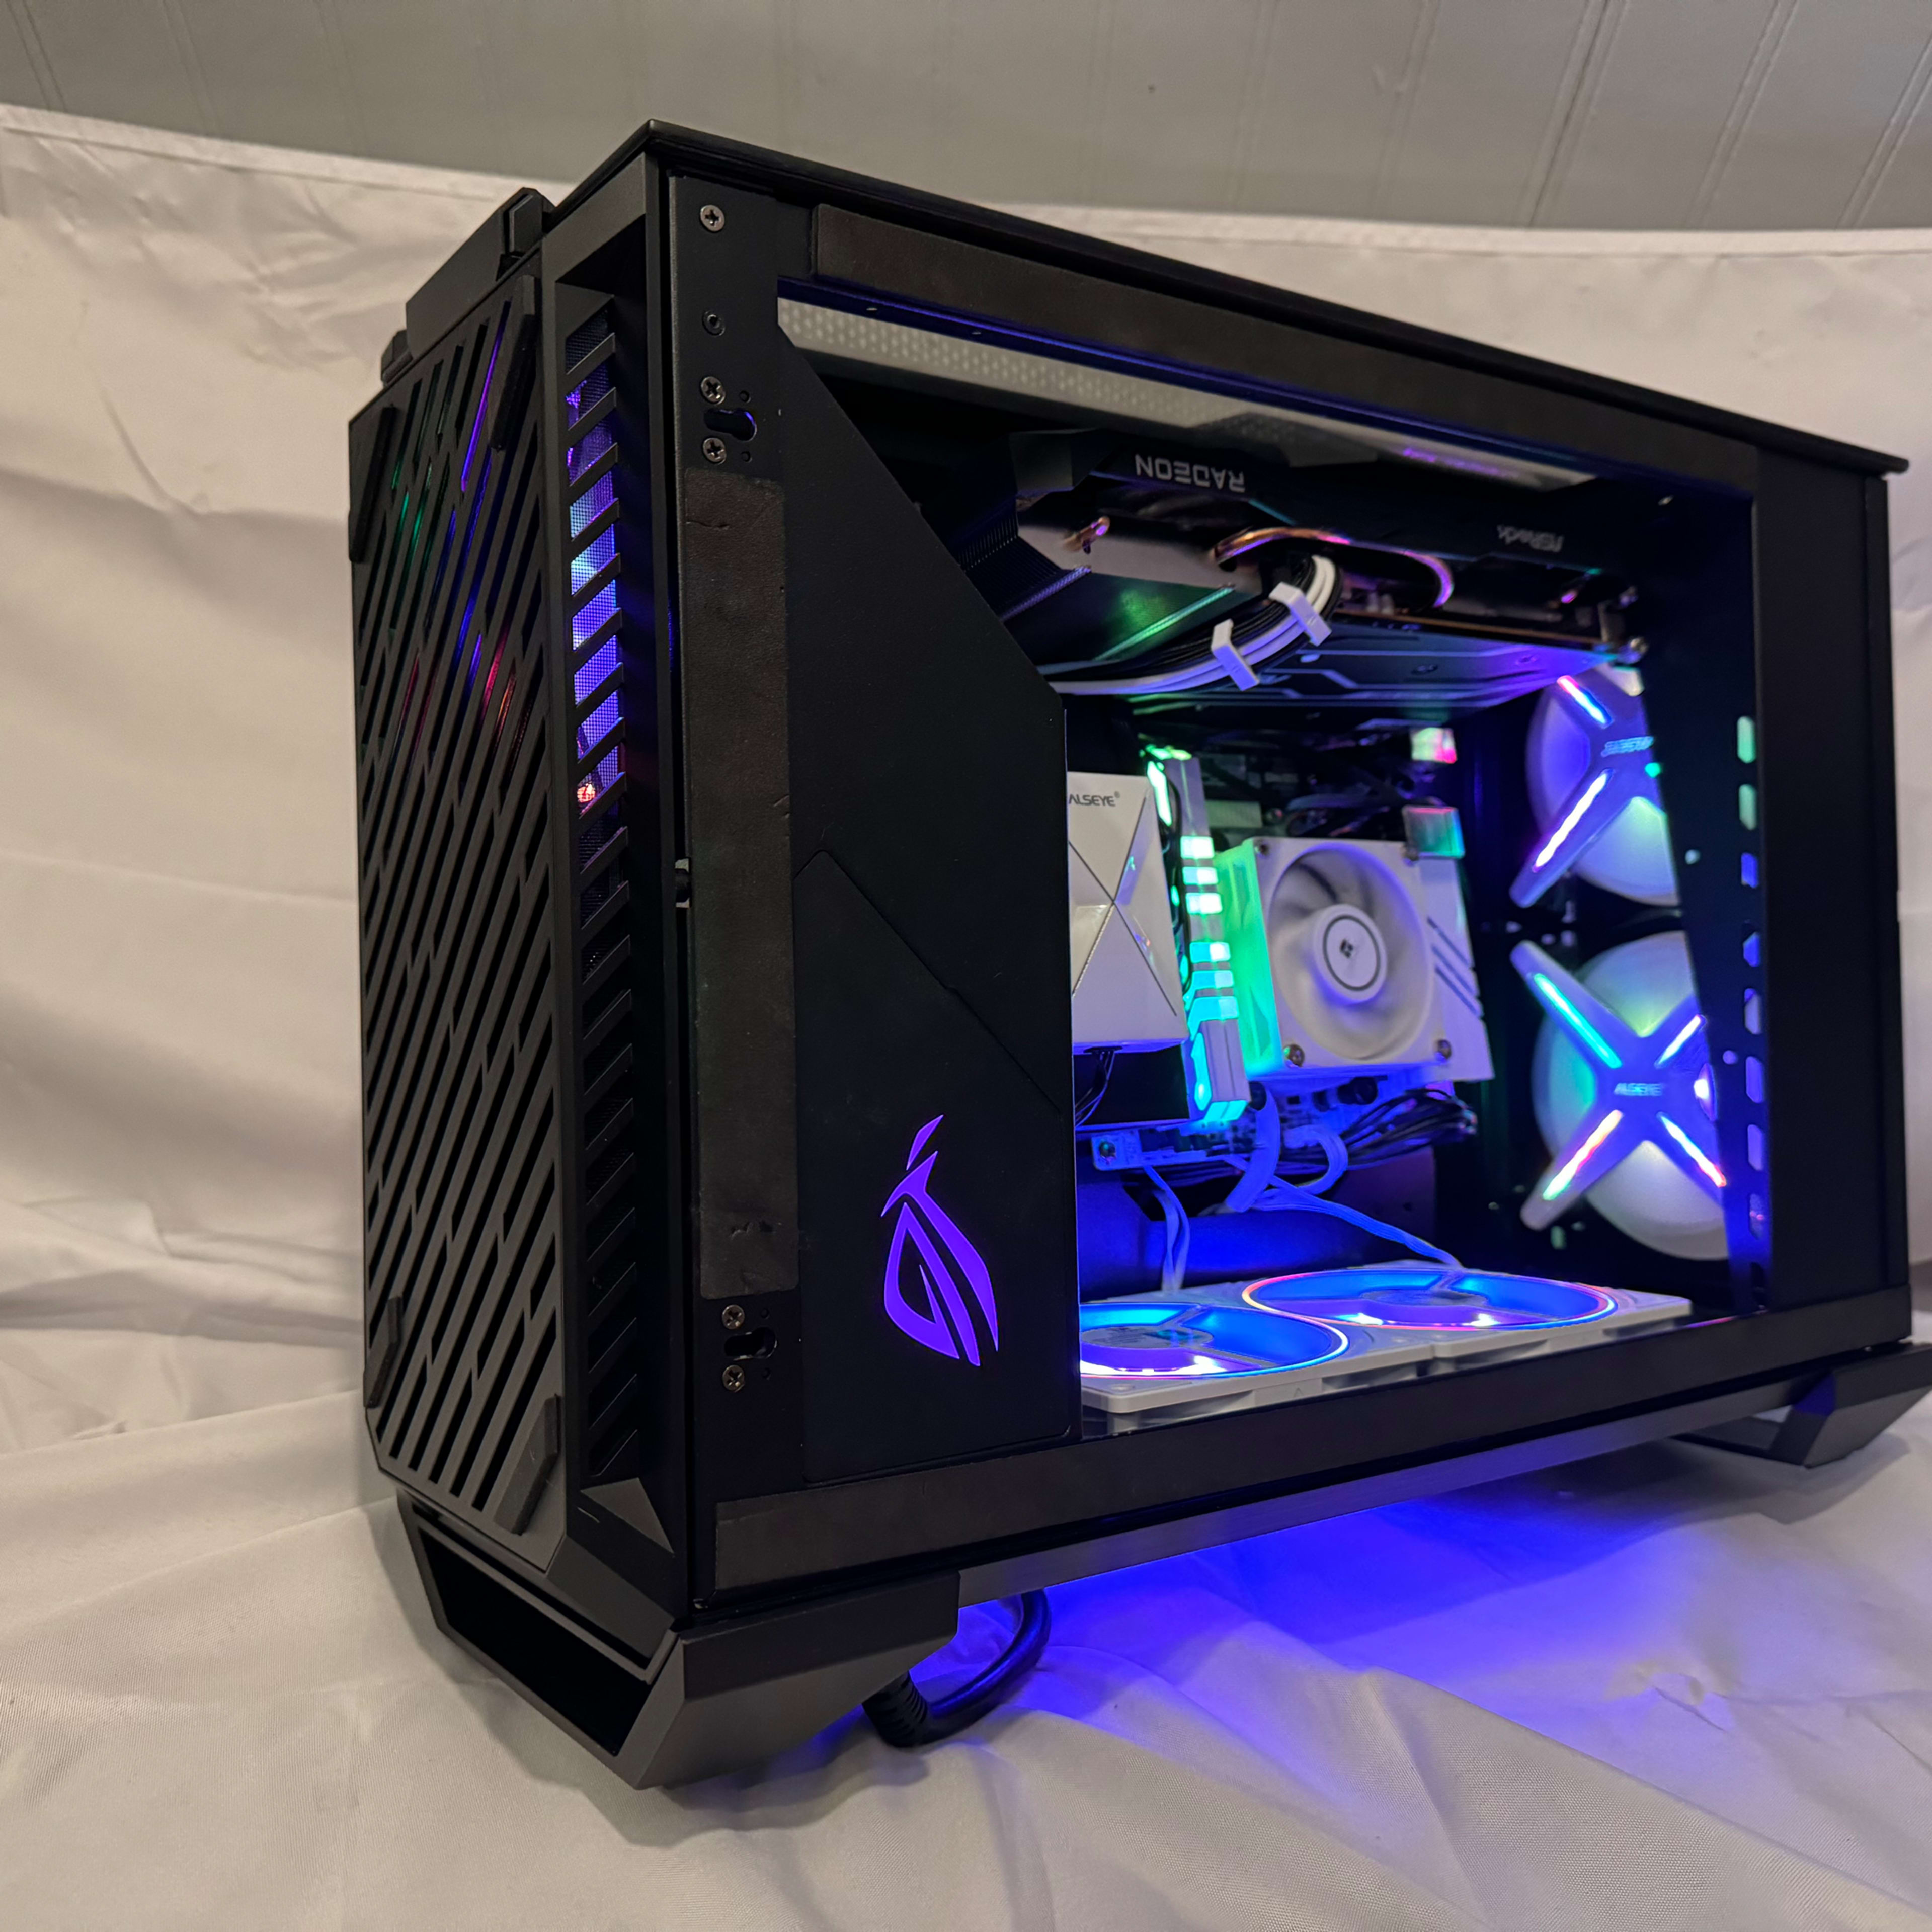 "Budget Clearance sale" Ryzen 5 3600, Rx 6600, 32gb, WiFi included gaming pc